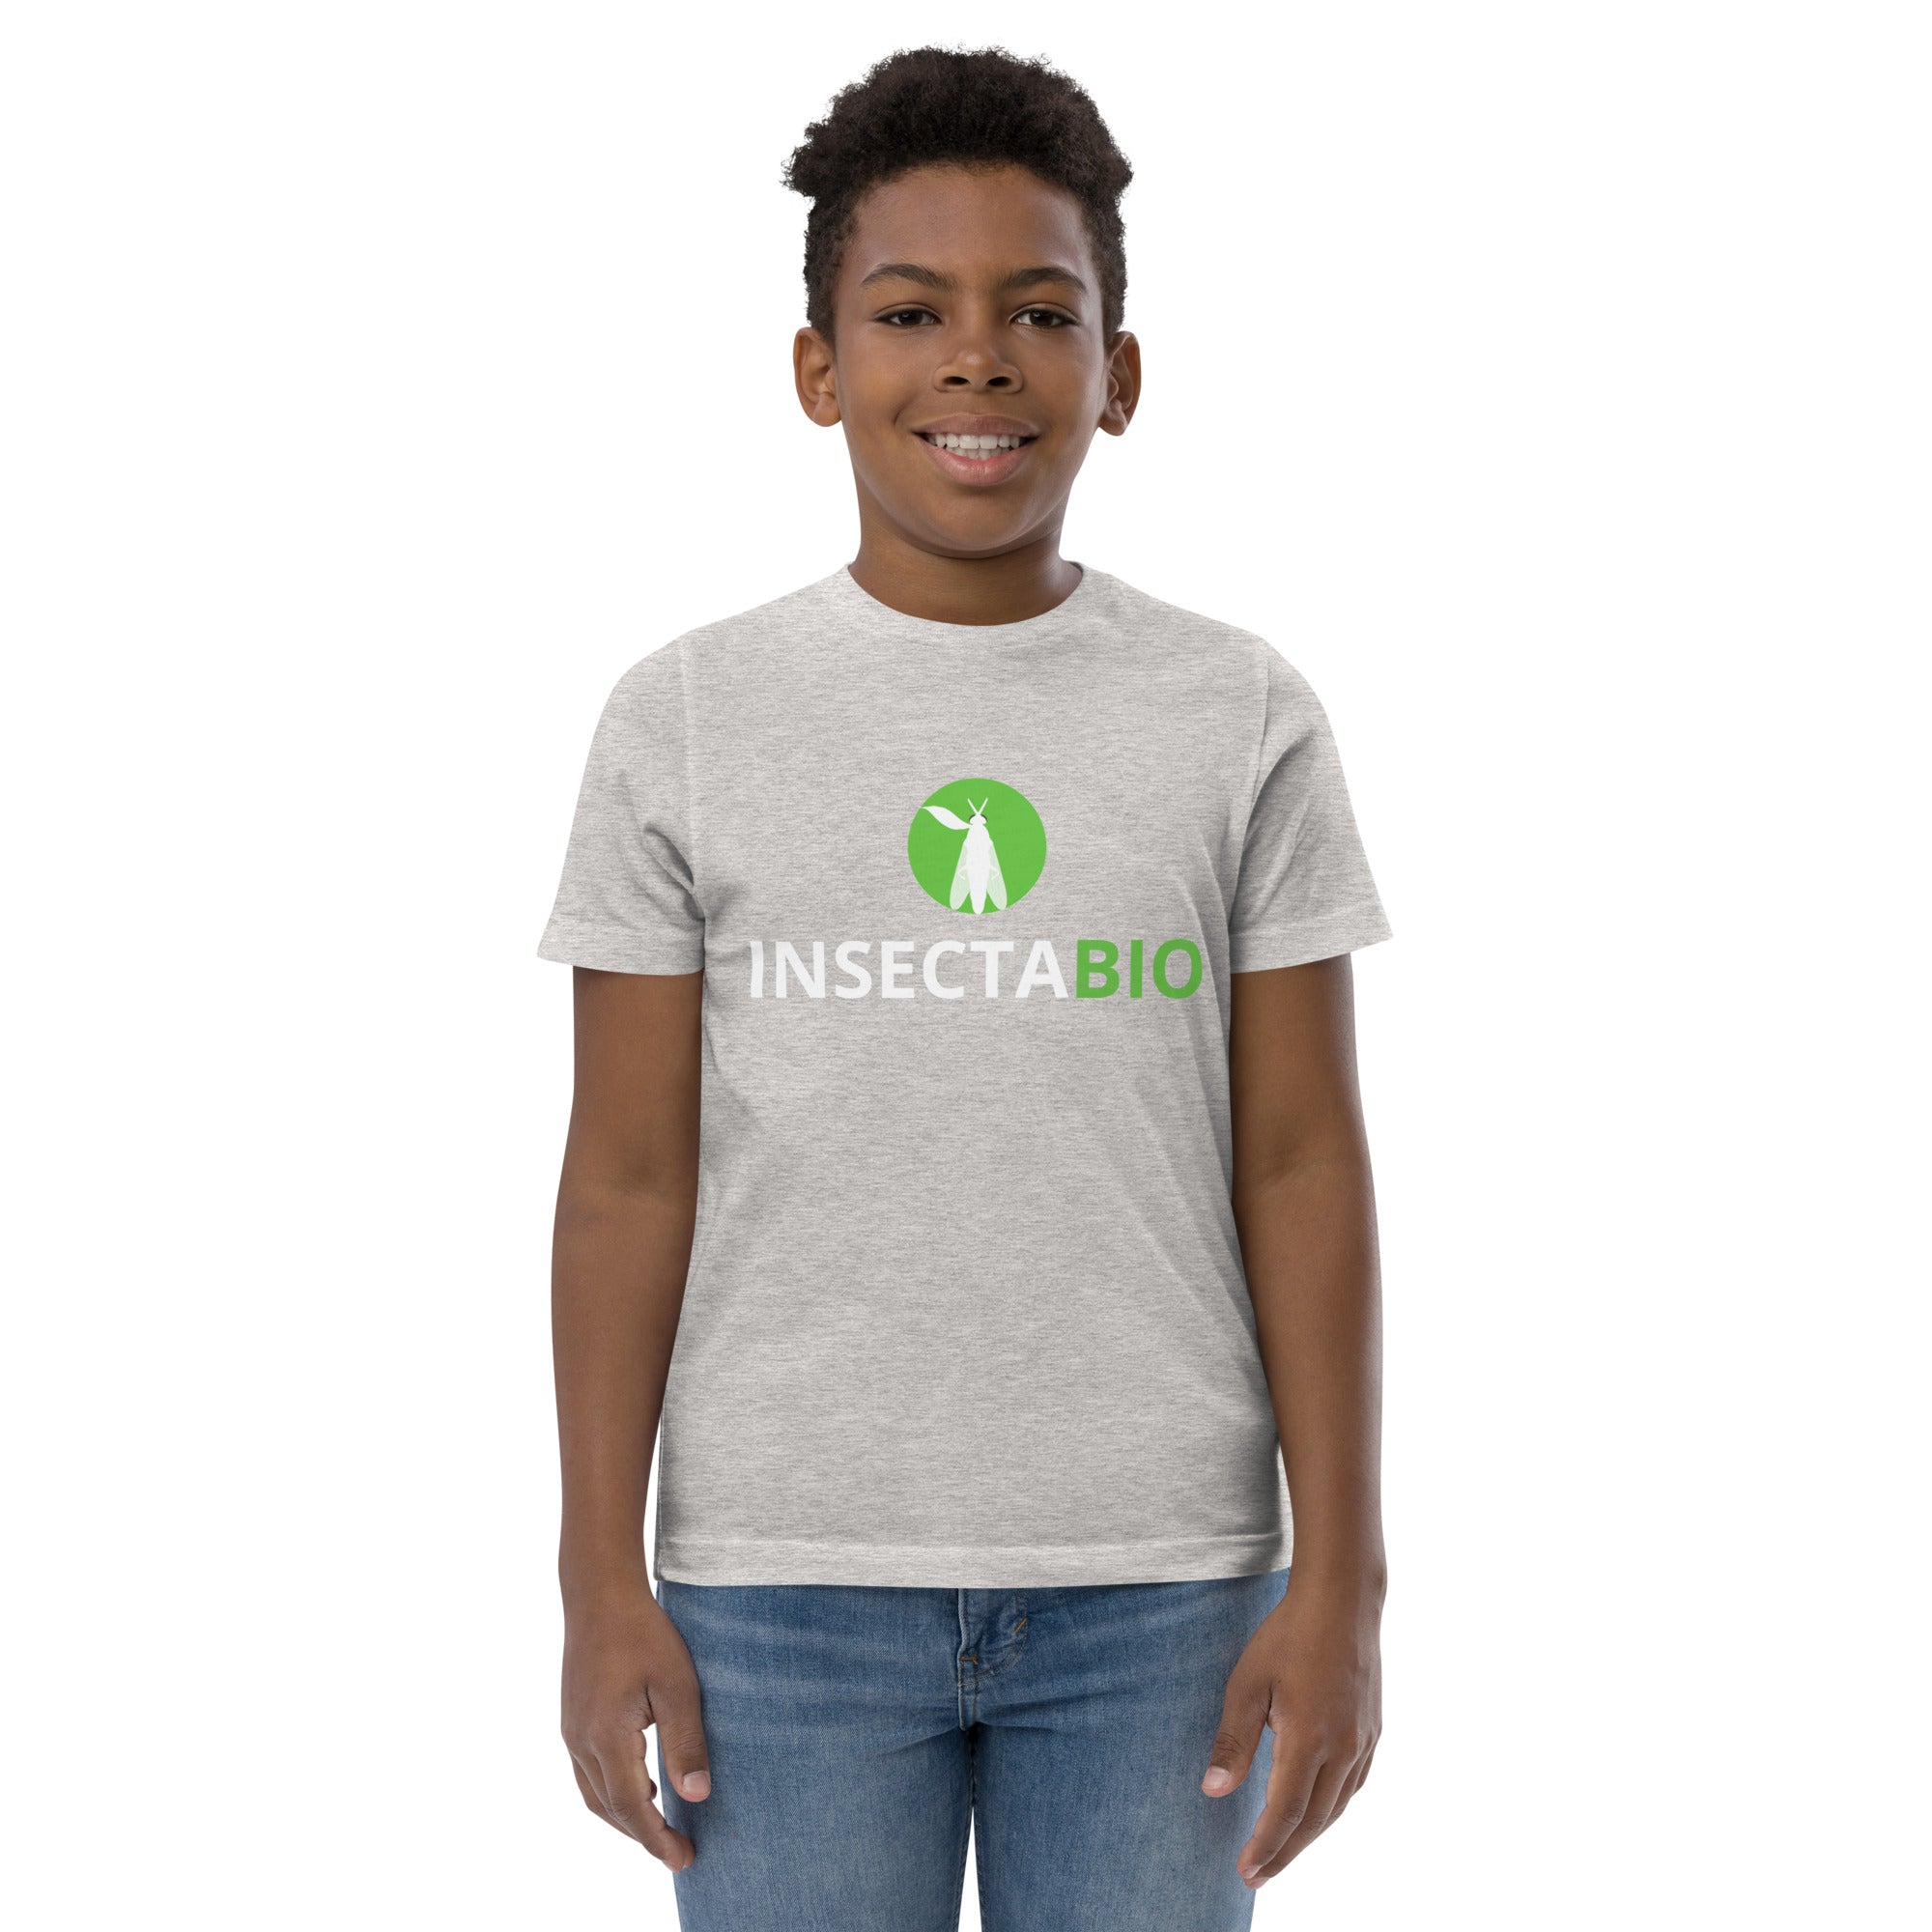 InsectaBio Youth jersey t-shirt